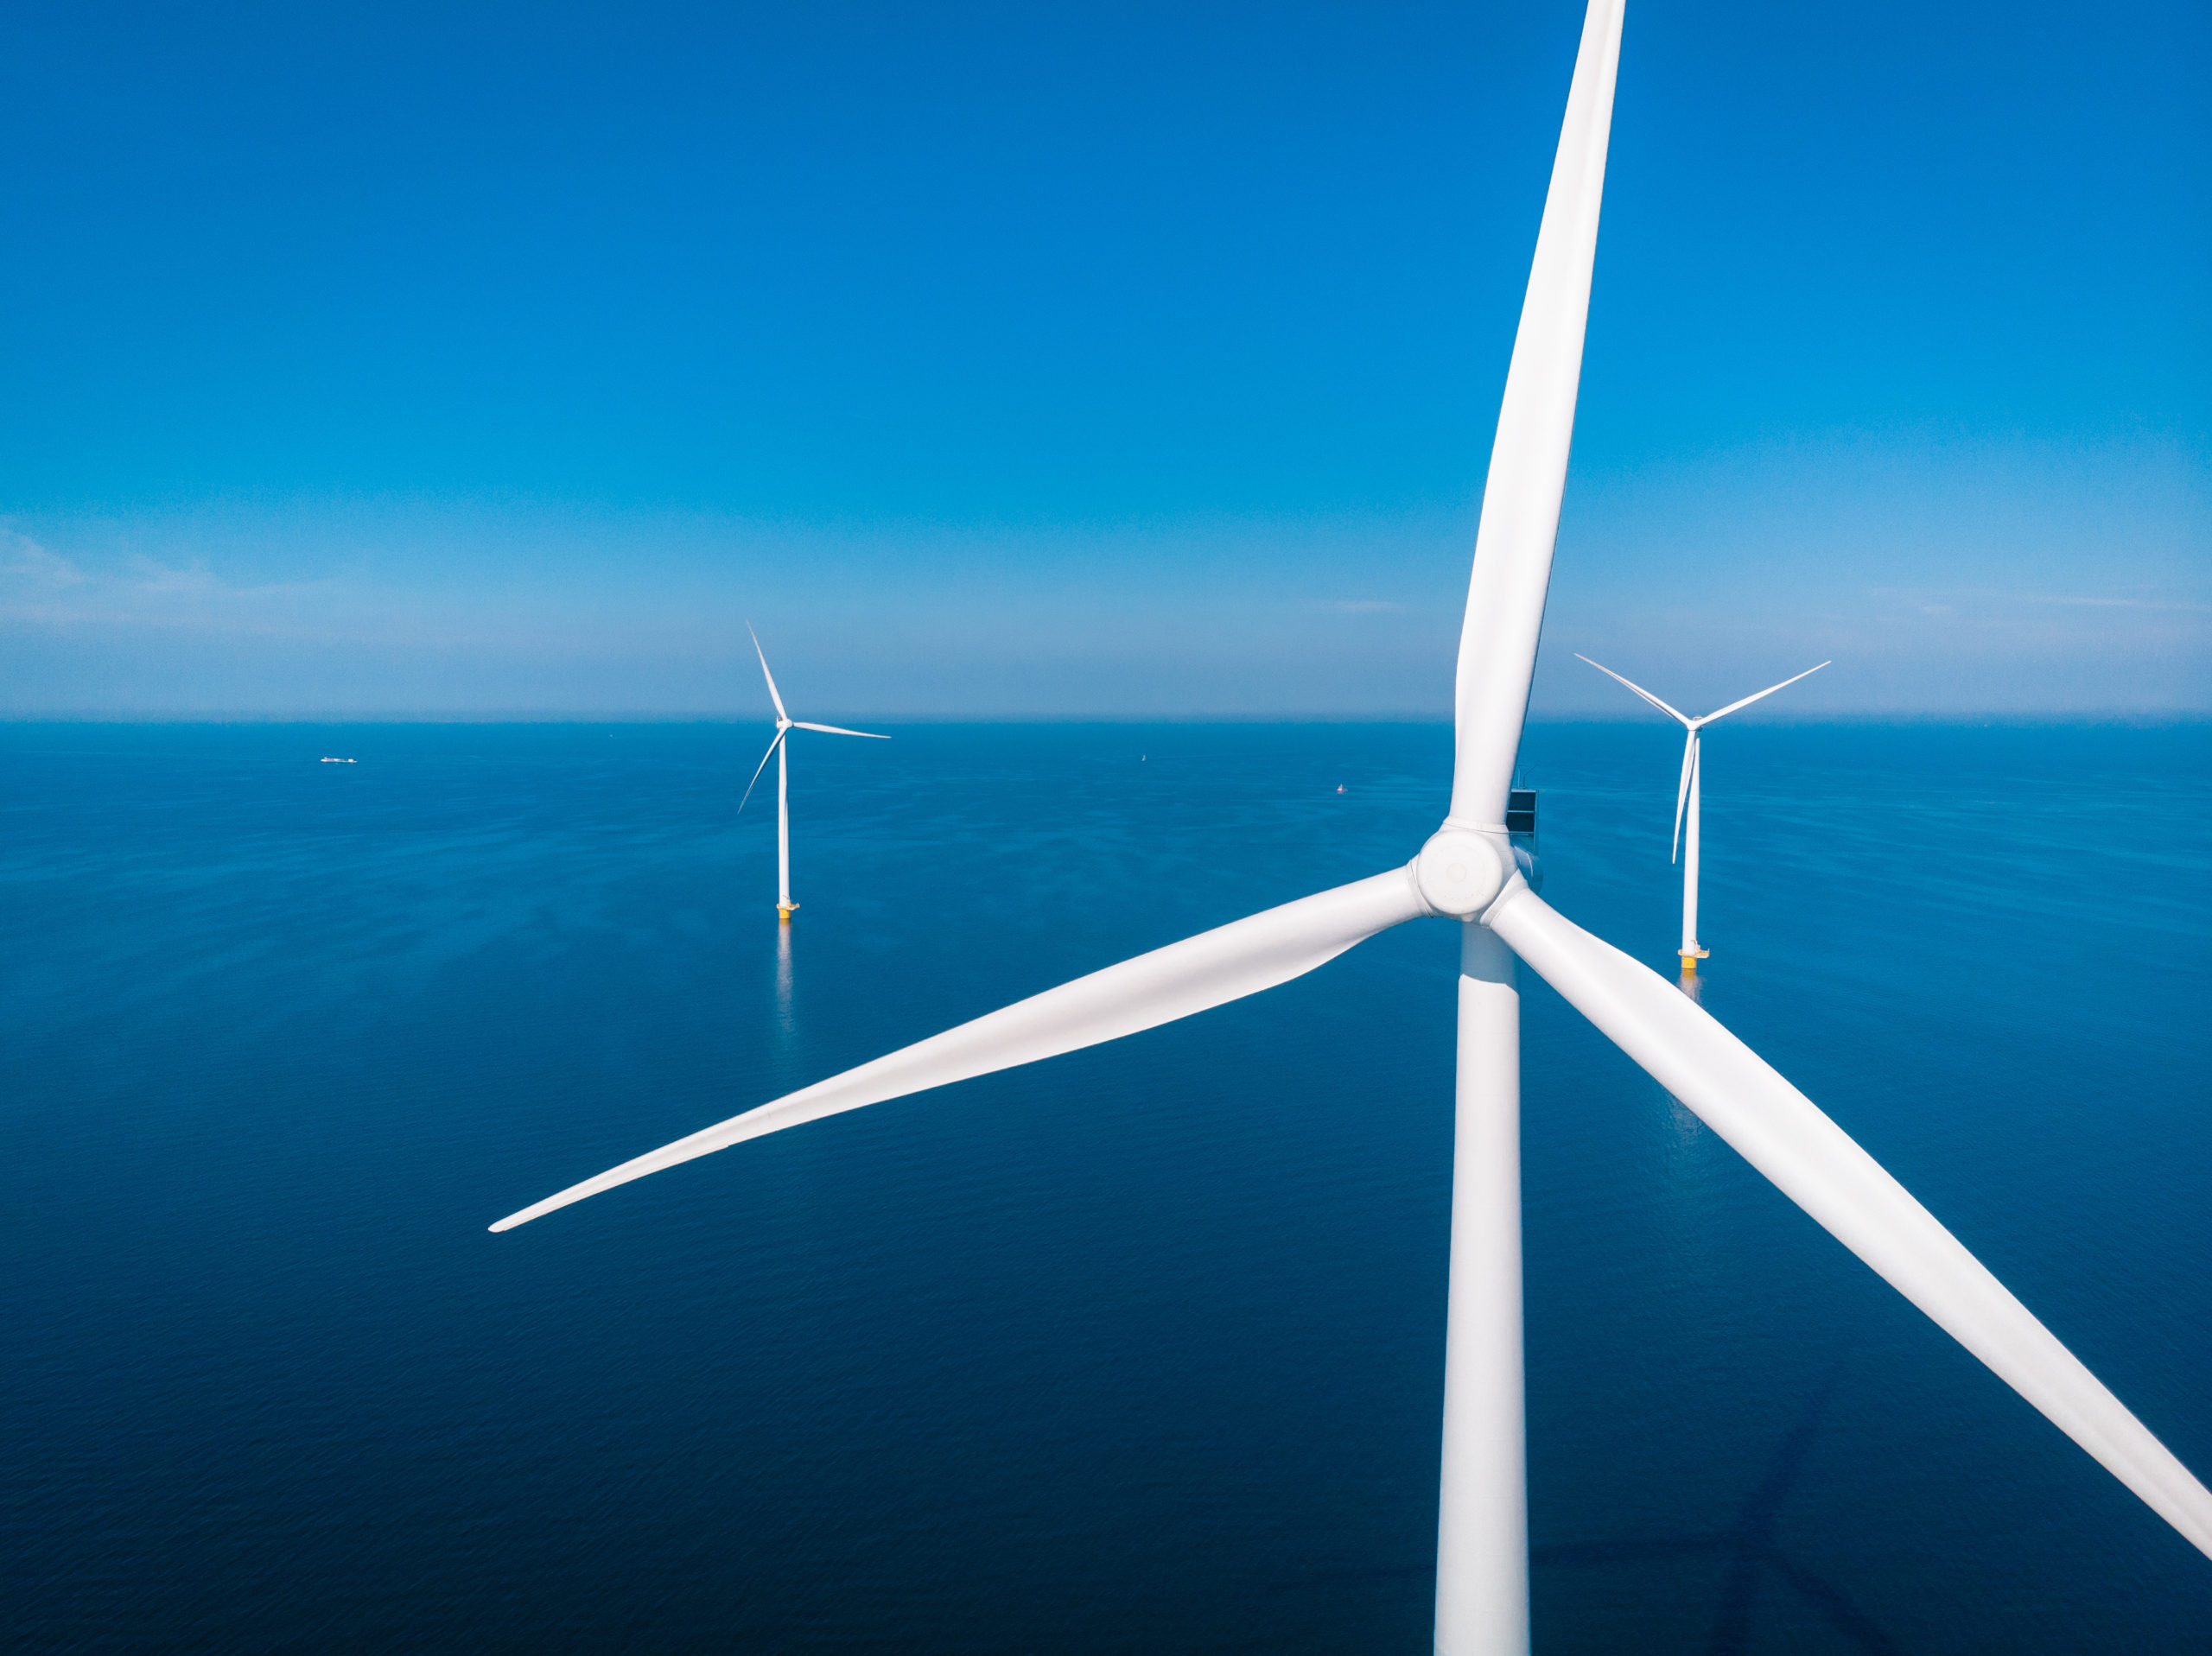 Wind turbine from aerial view, Drone view at windpark westermeerdijk a windmill farm in the lake IJsselmeer the biggest in the Netherlands,Sustainable development, renewable energy Netherlands / Adobe Stock/Patrycja Rapacka